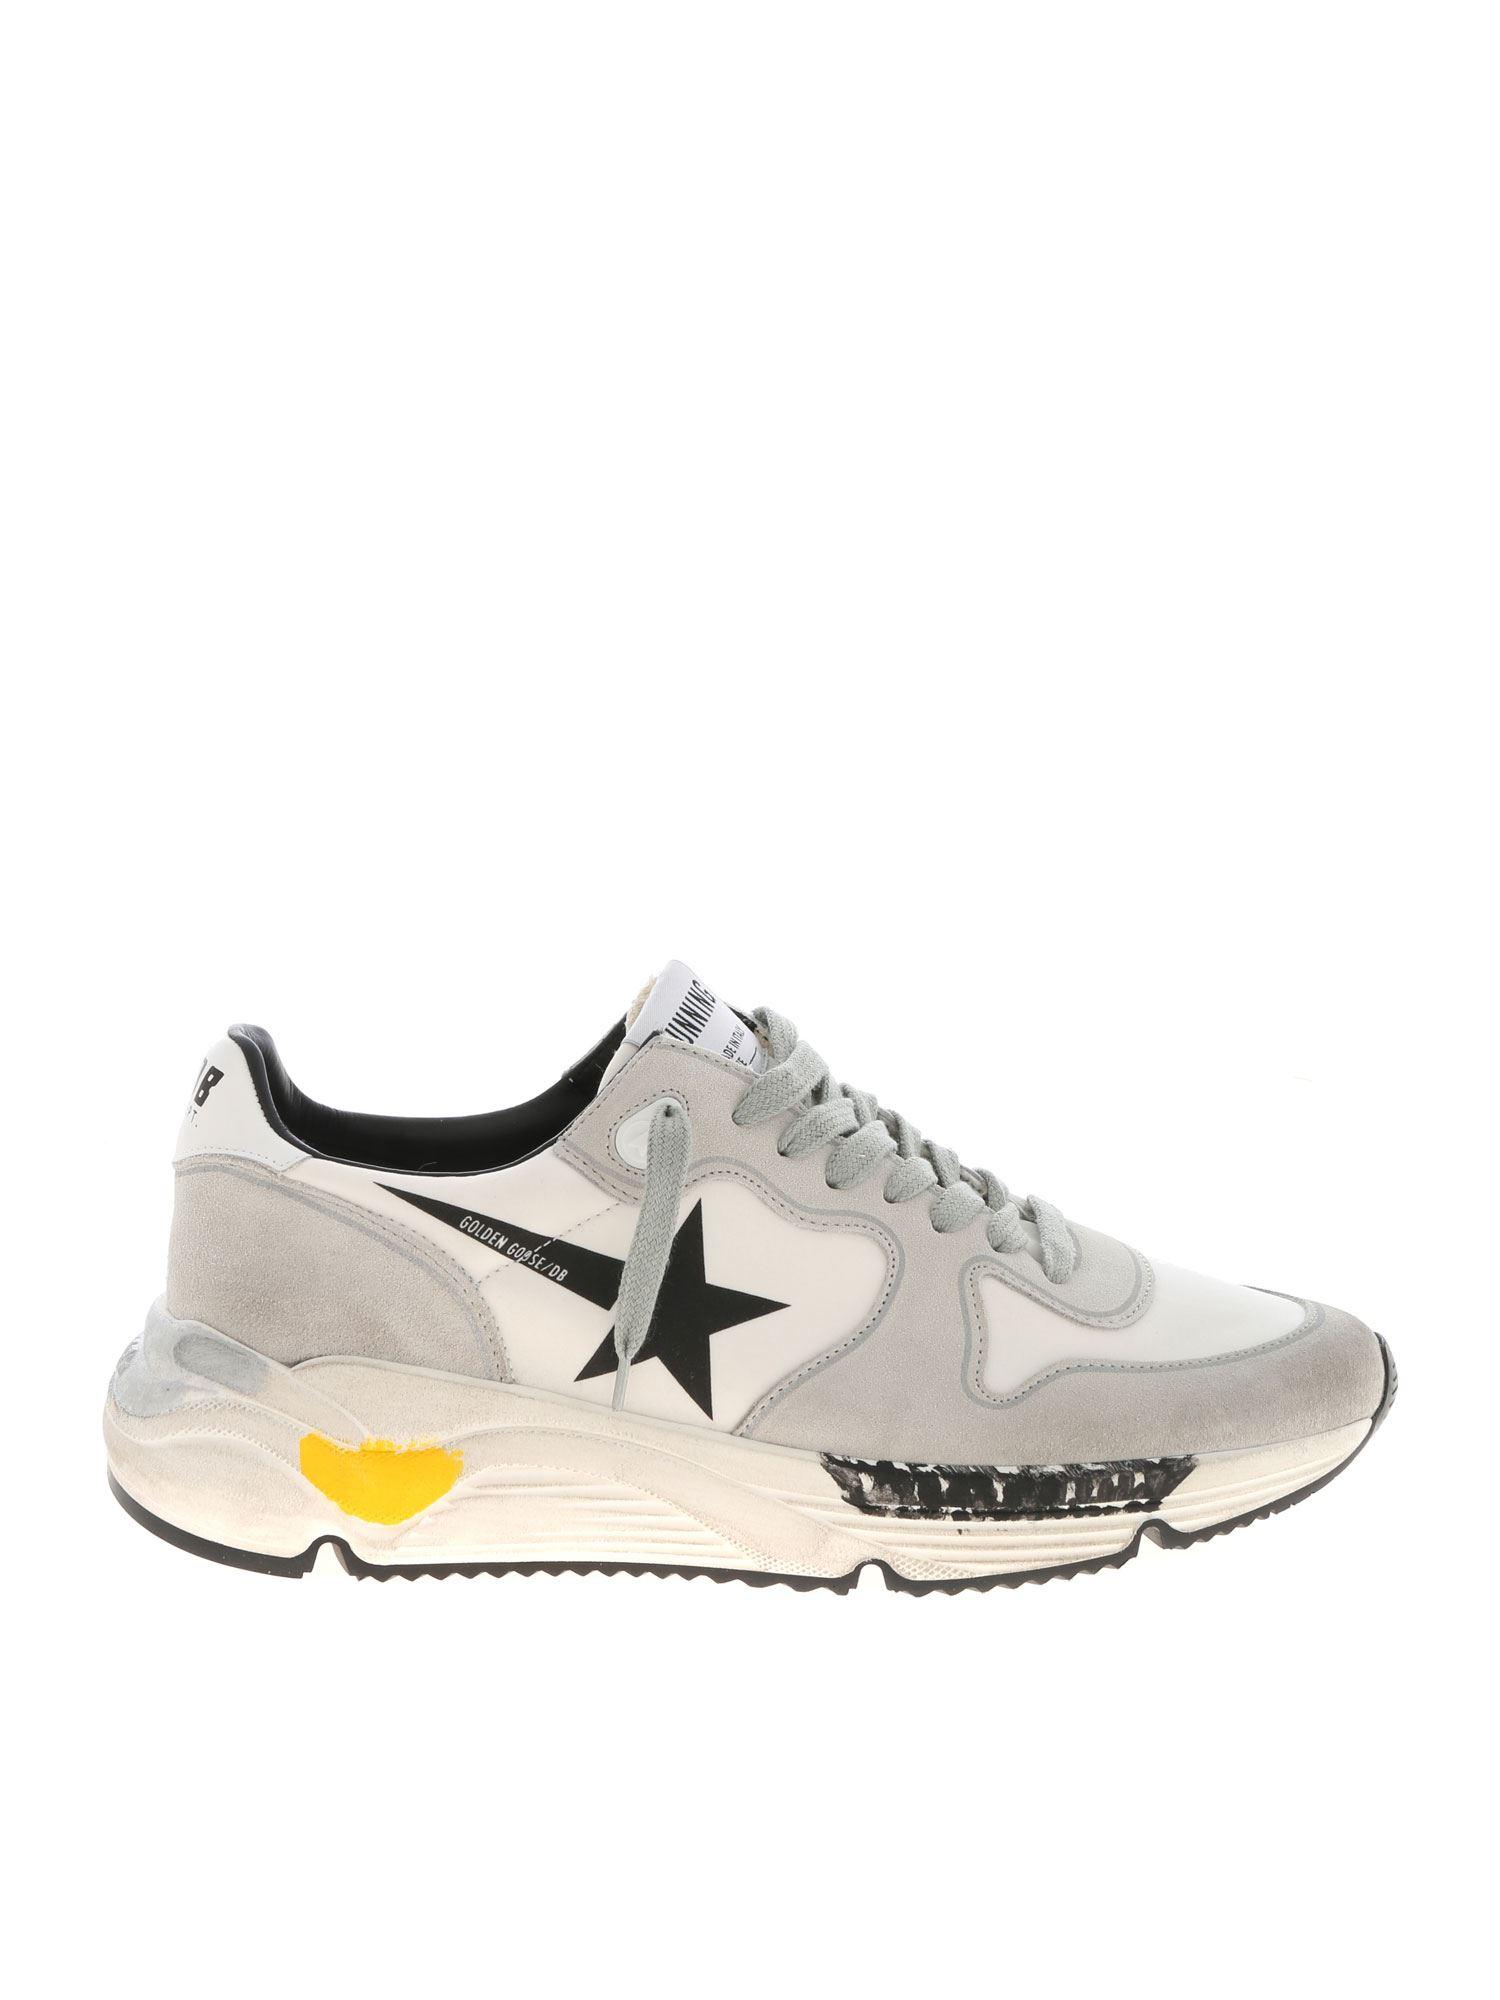 Golden Goose Deluxe Brand Leather Running Sole Sneakers in White Black ...